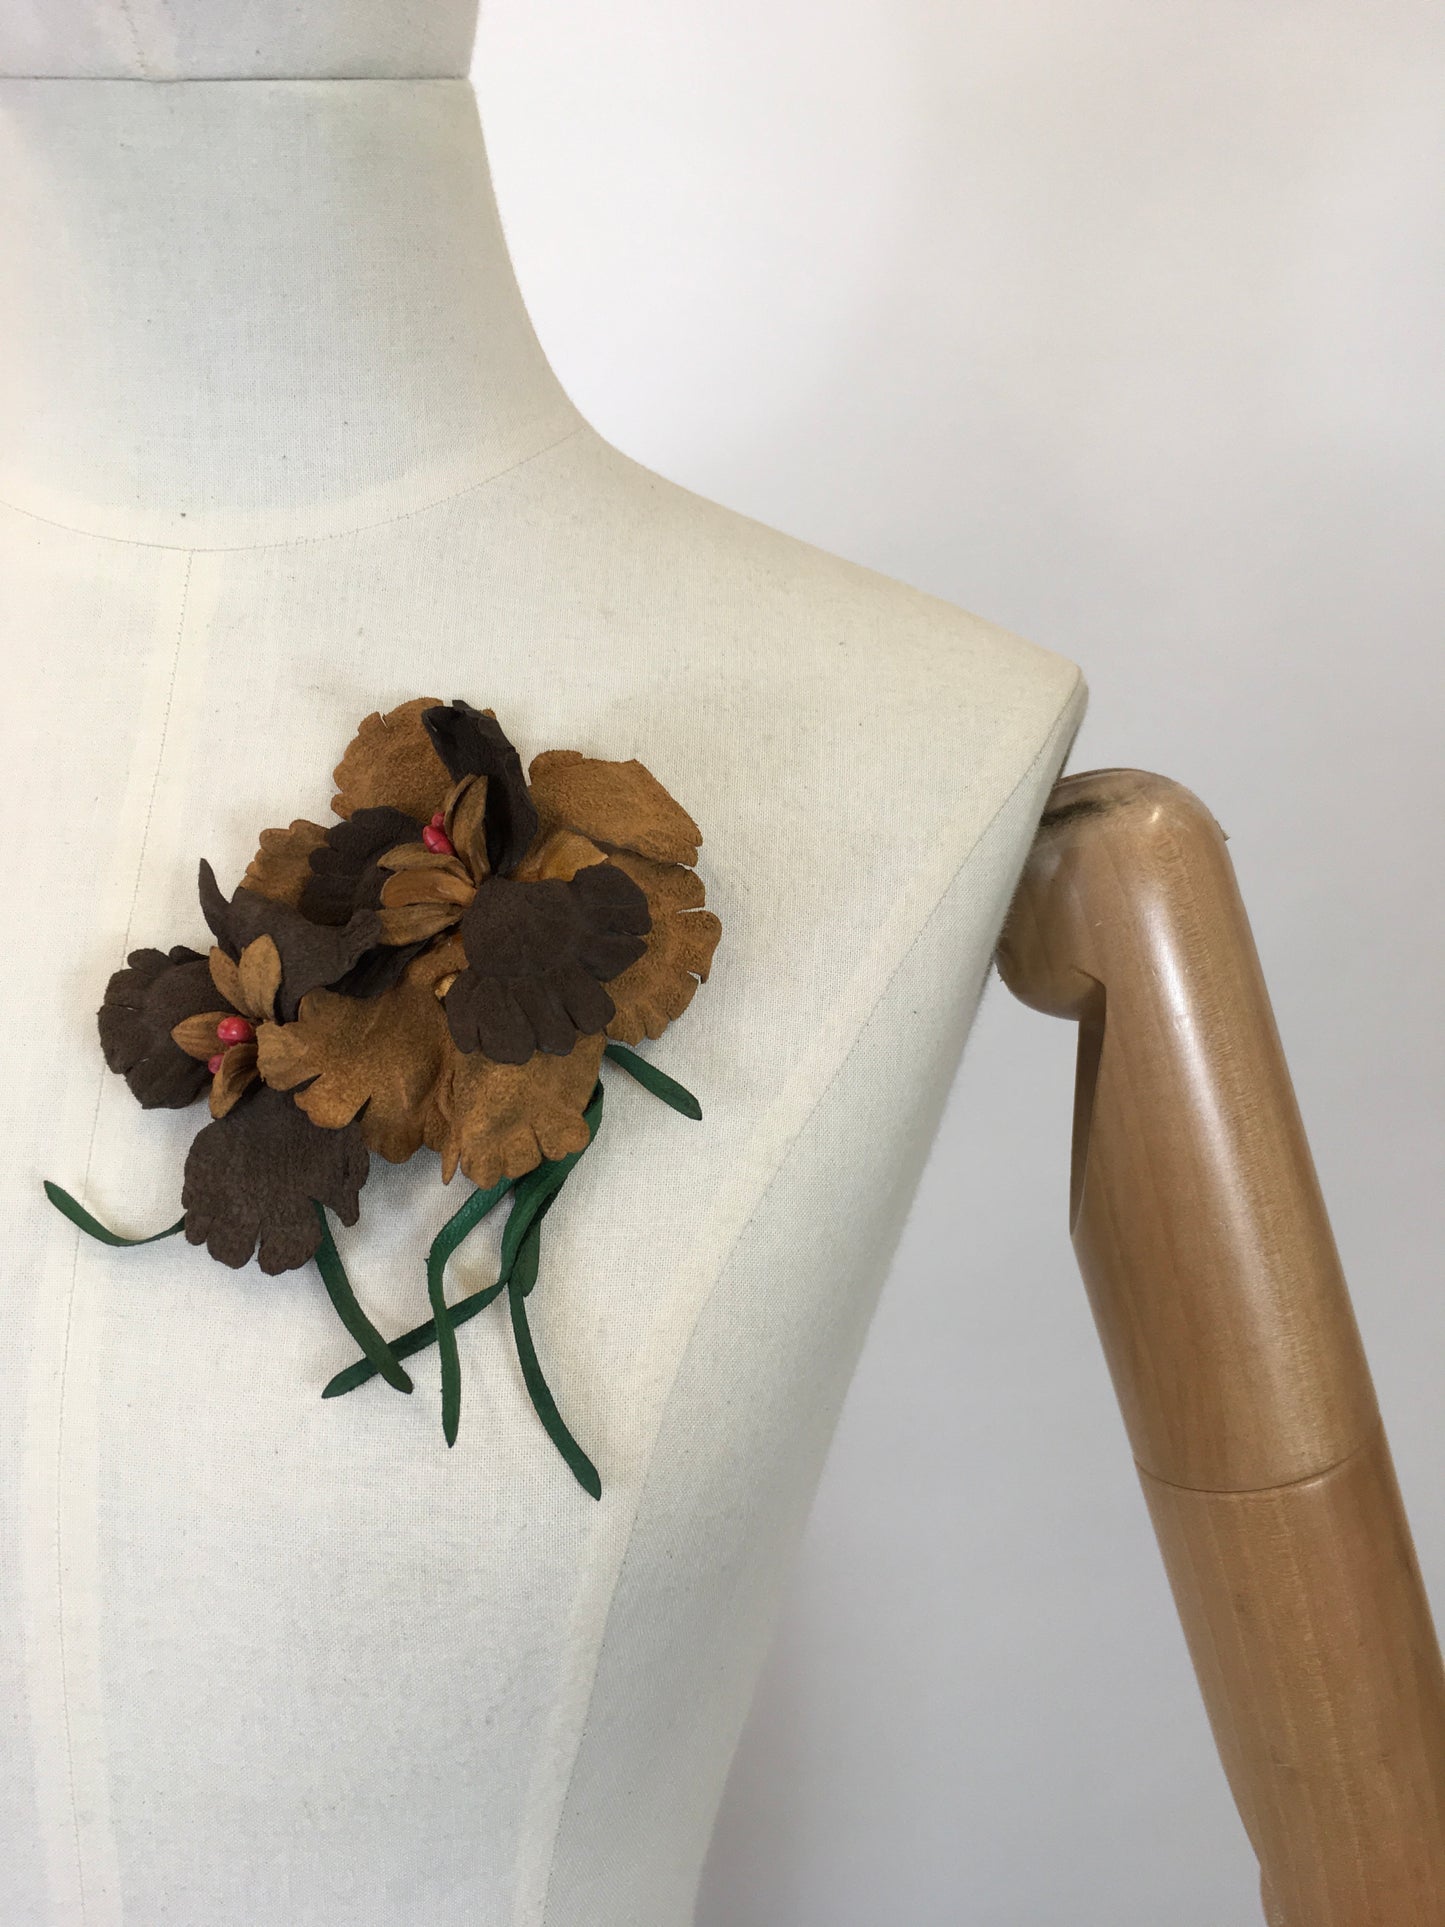 Original Made Do & Mend Leather/suede Corsage - in 2 tone browns with red berries